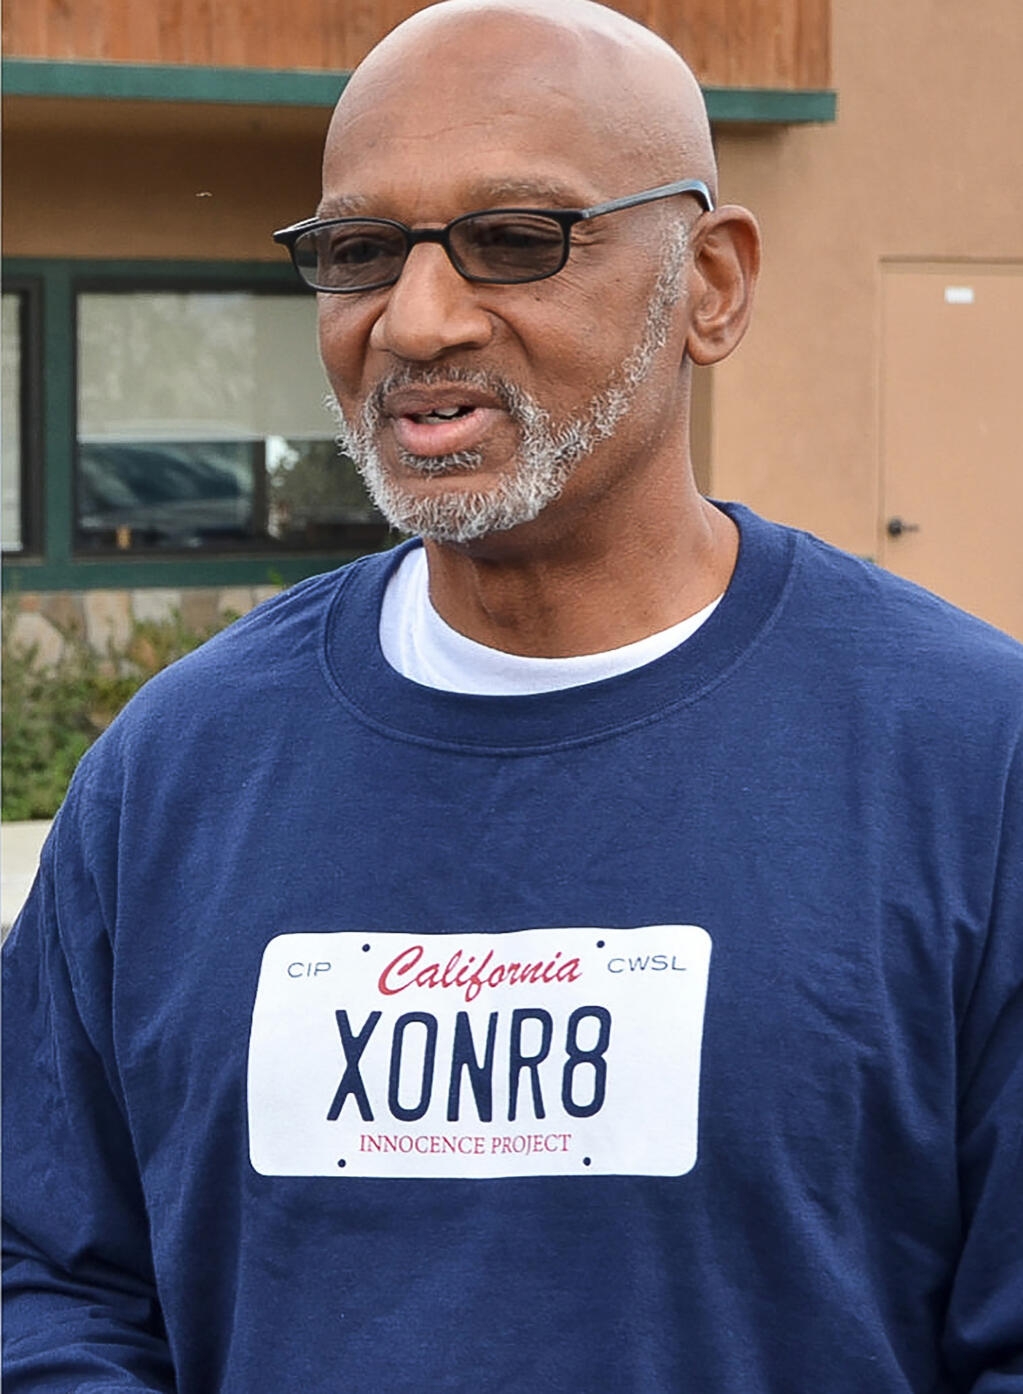 FILE - This Oct. 3, 2018, file photo provided by the California Innocence Project shows Horace Roberts after his release from Avenal State Prison in Avenal, Calif. Roberts was wrongly convicted of a 1998 murder in Southern California and spent two decades in prison. Riverside County has paid Roberts and his attorneys $11 million to settle a lawsuit Roberts filed against Riverside and San Bernardino counties and the investigators who worked the murder case. (Jenna Little/California Innocence Project via AP, File)